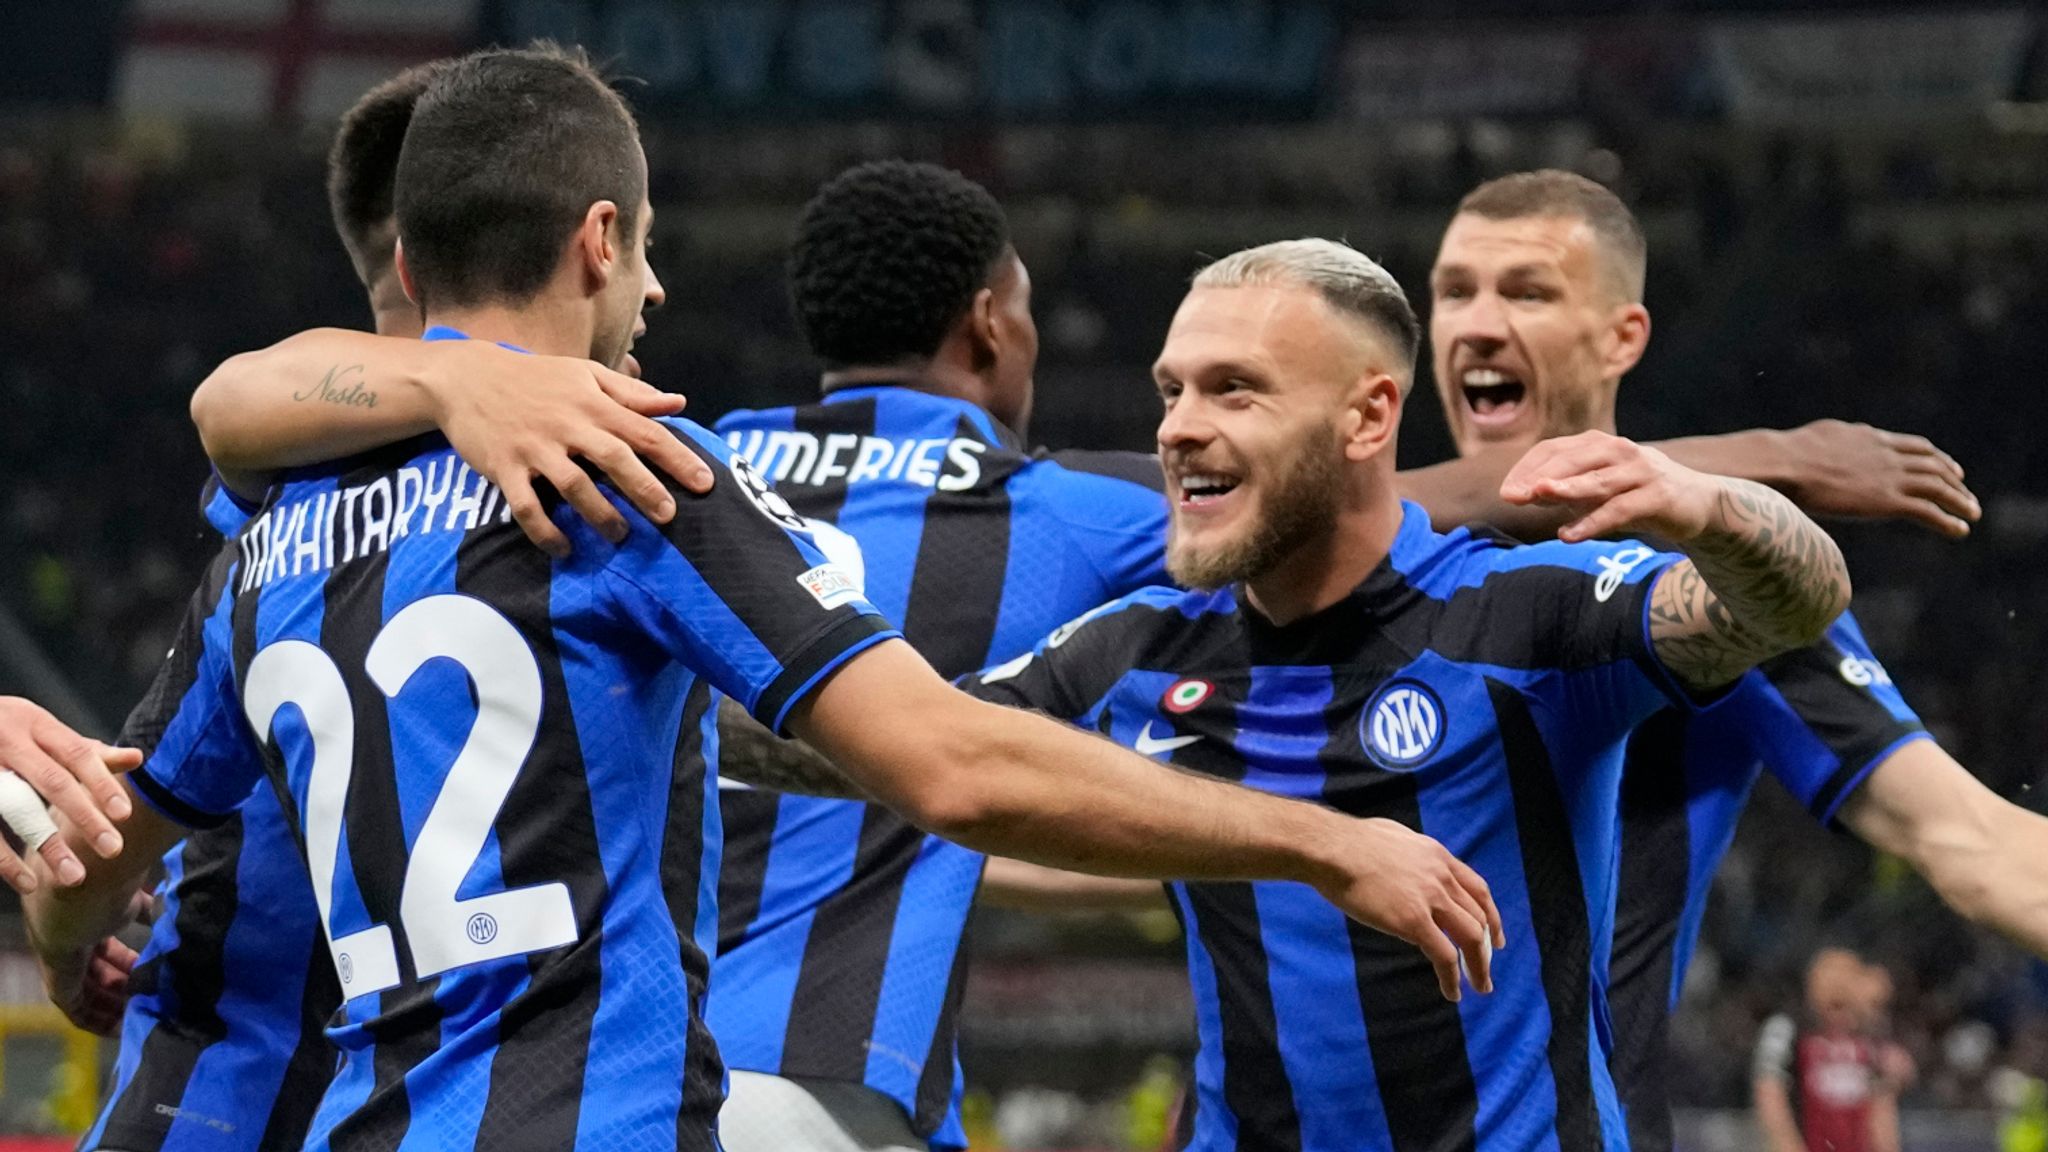 According to BBC report:Rookie Inter enjoys youth at Meazza